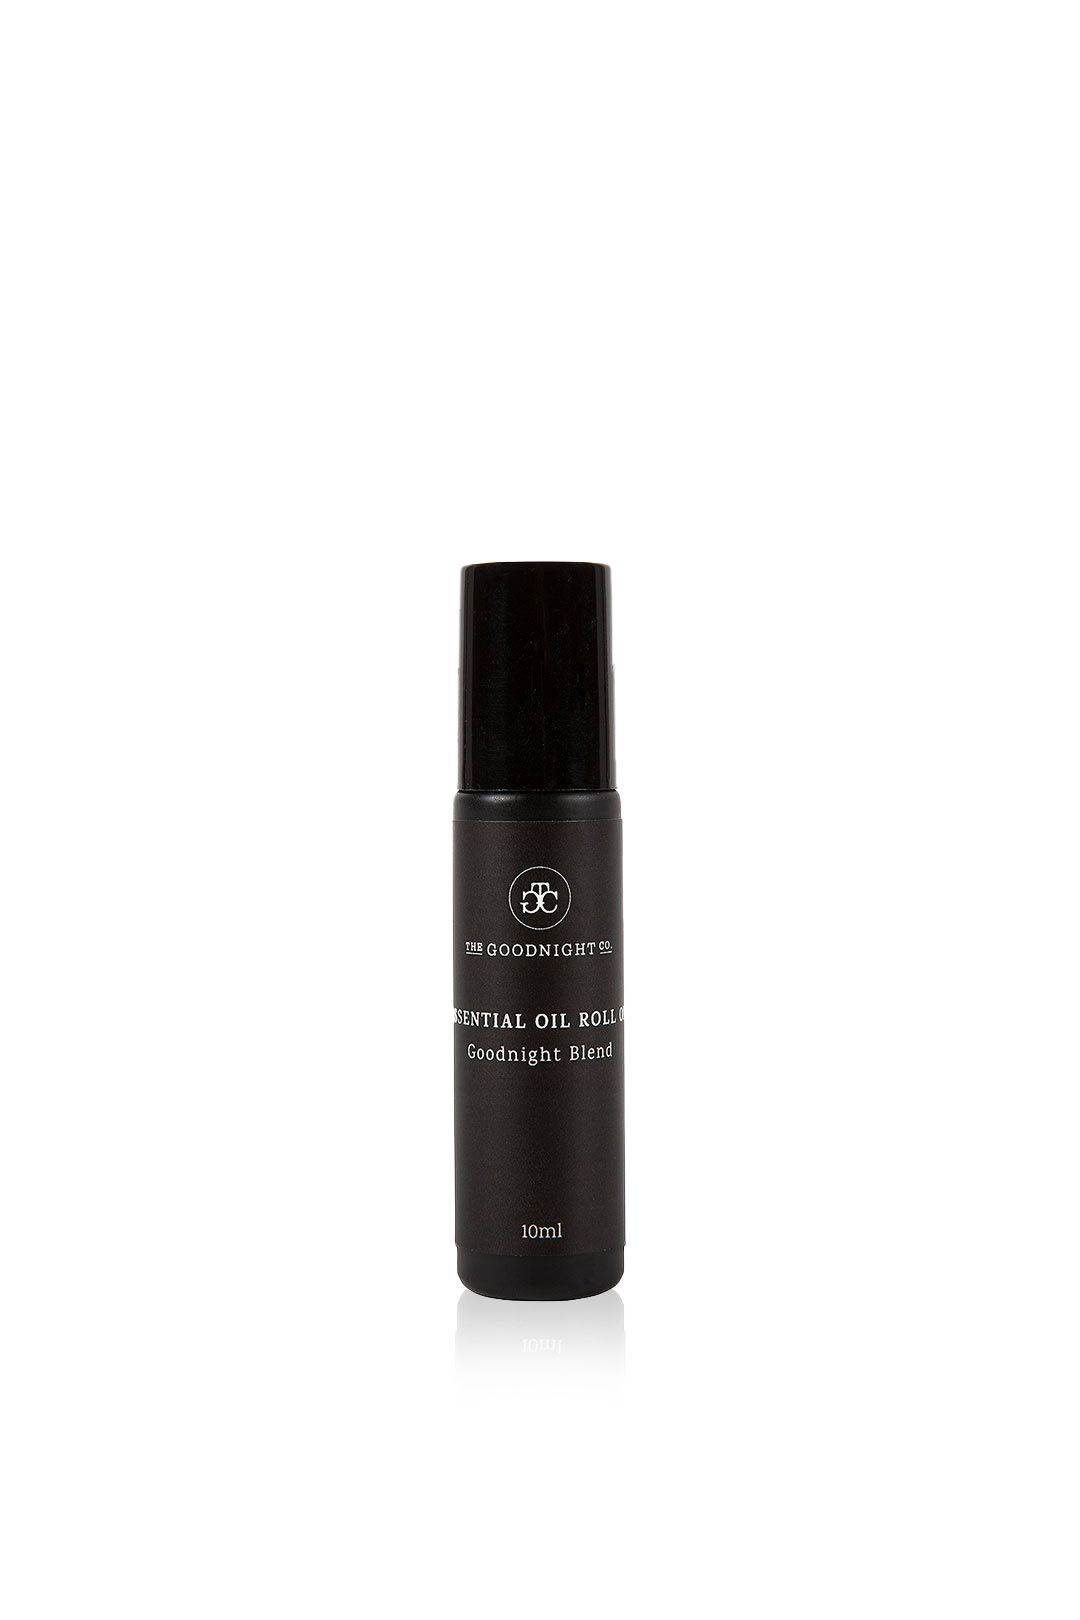 The-Goodnight-Co-Essential-Oils Roll-On-Goodnight-Product